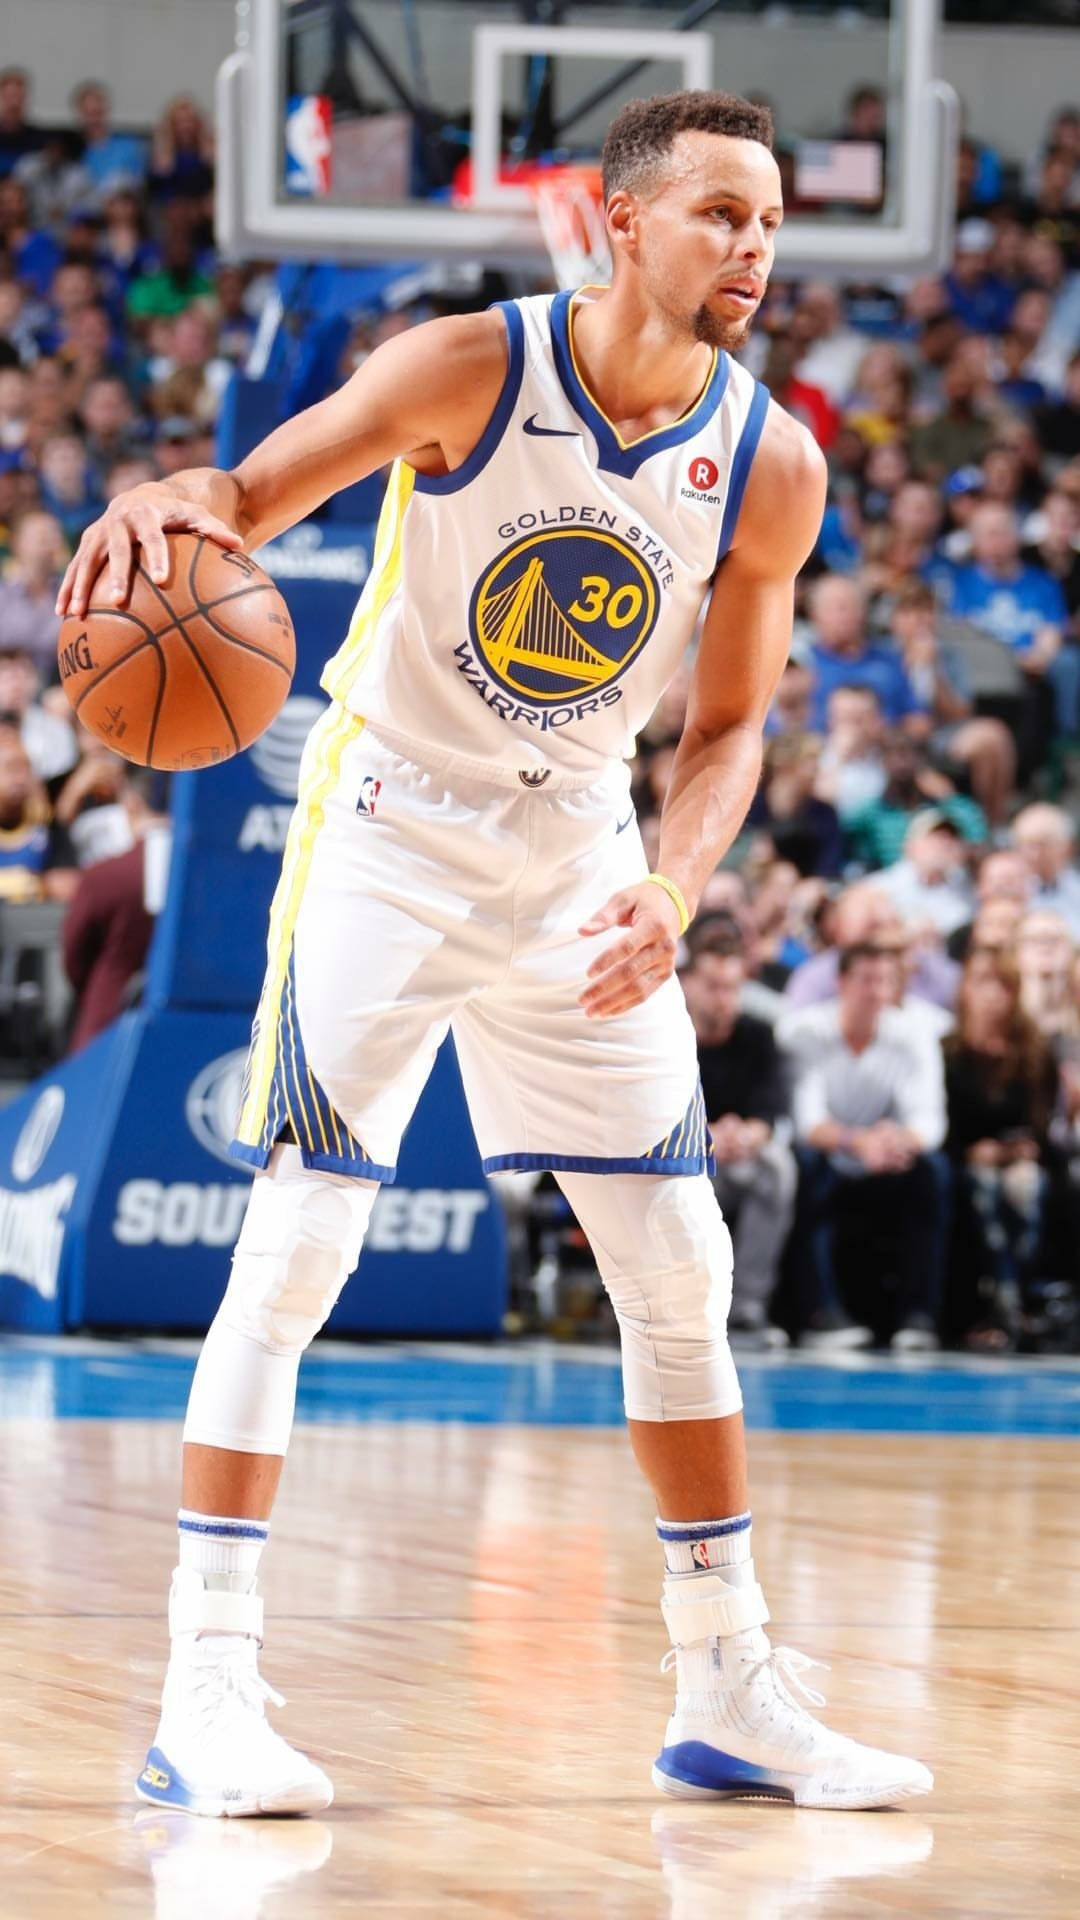 Stephen Curry, 2017 wallpapers, Ryan Sellers, Curry photos, 1080x1920 Full HD Phone